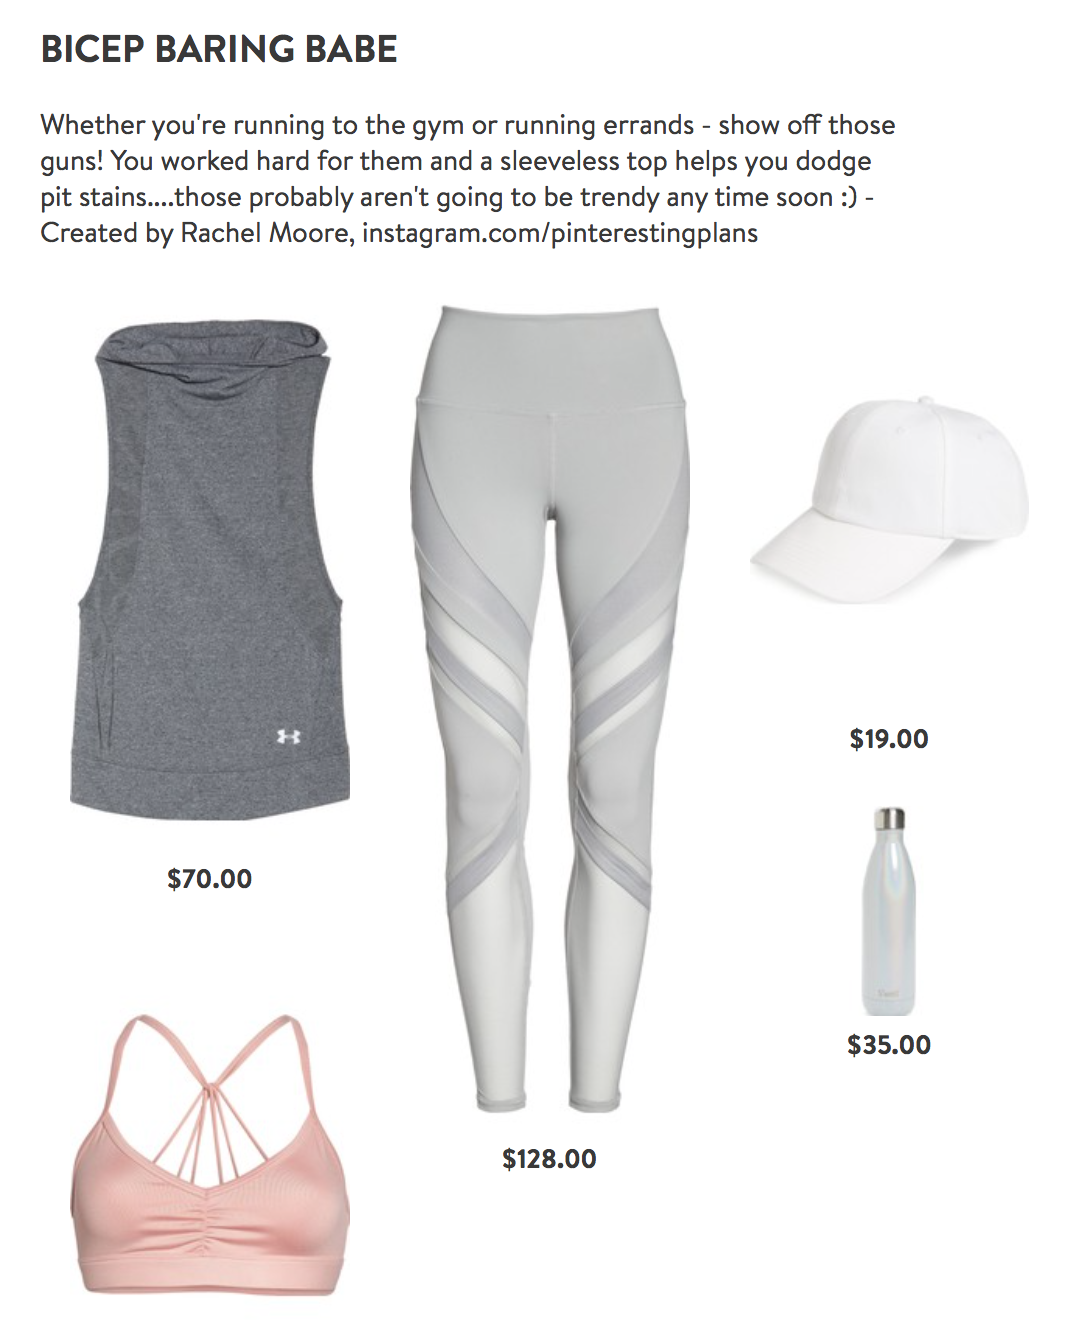 May Workout Outfit from Nordstrom On Pinteresting Plans Fashion Blog